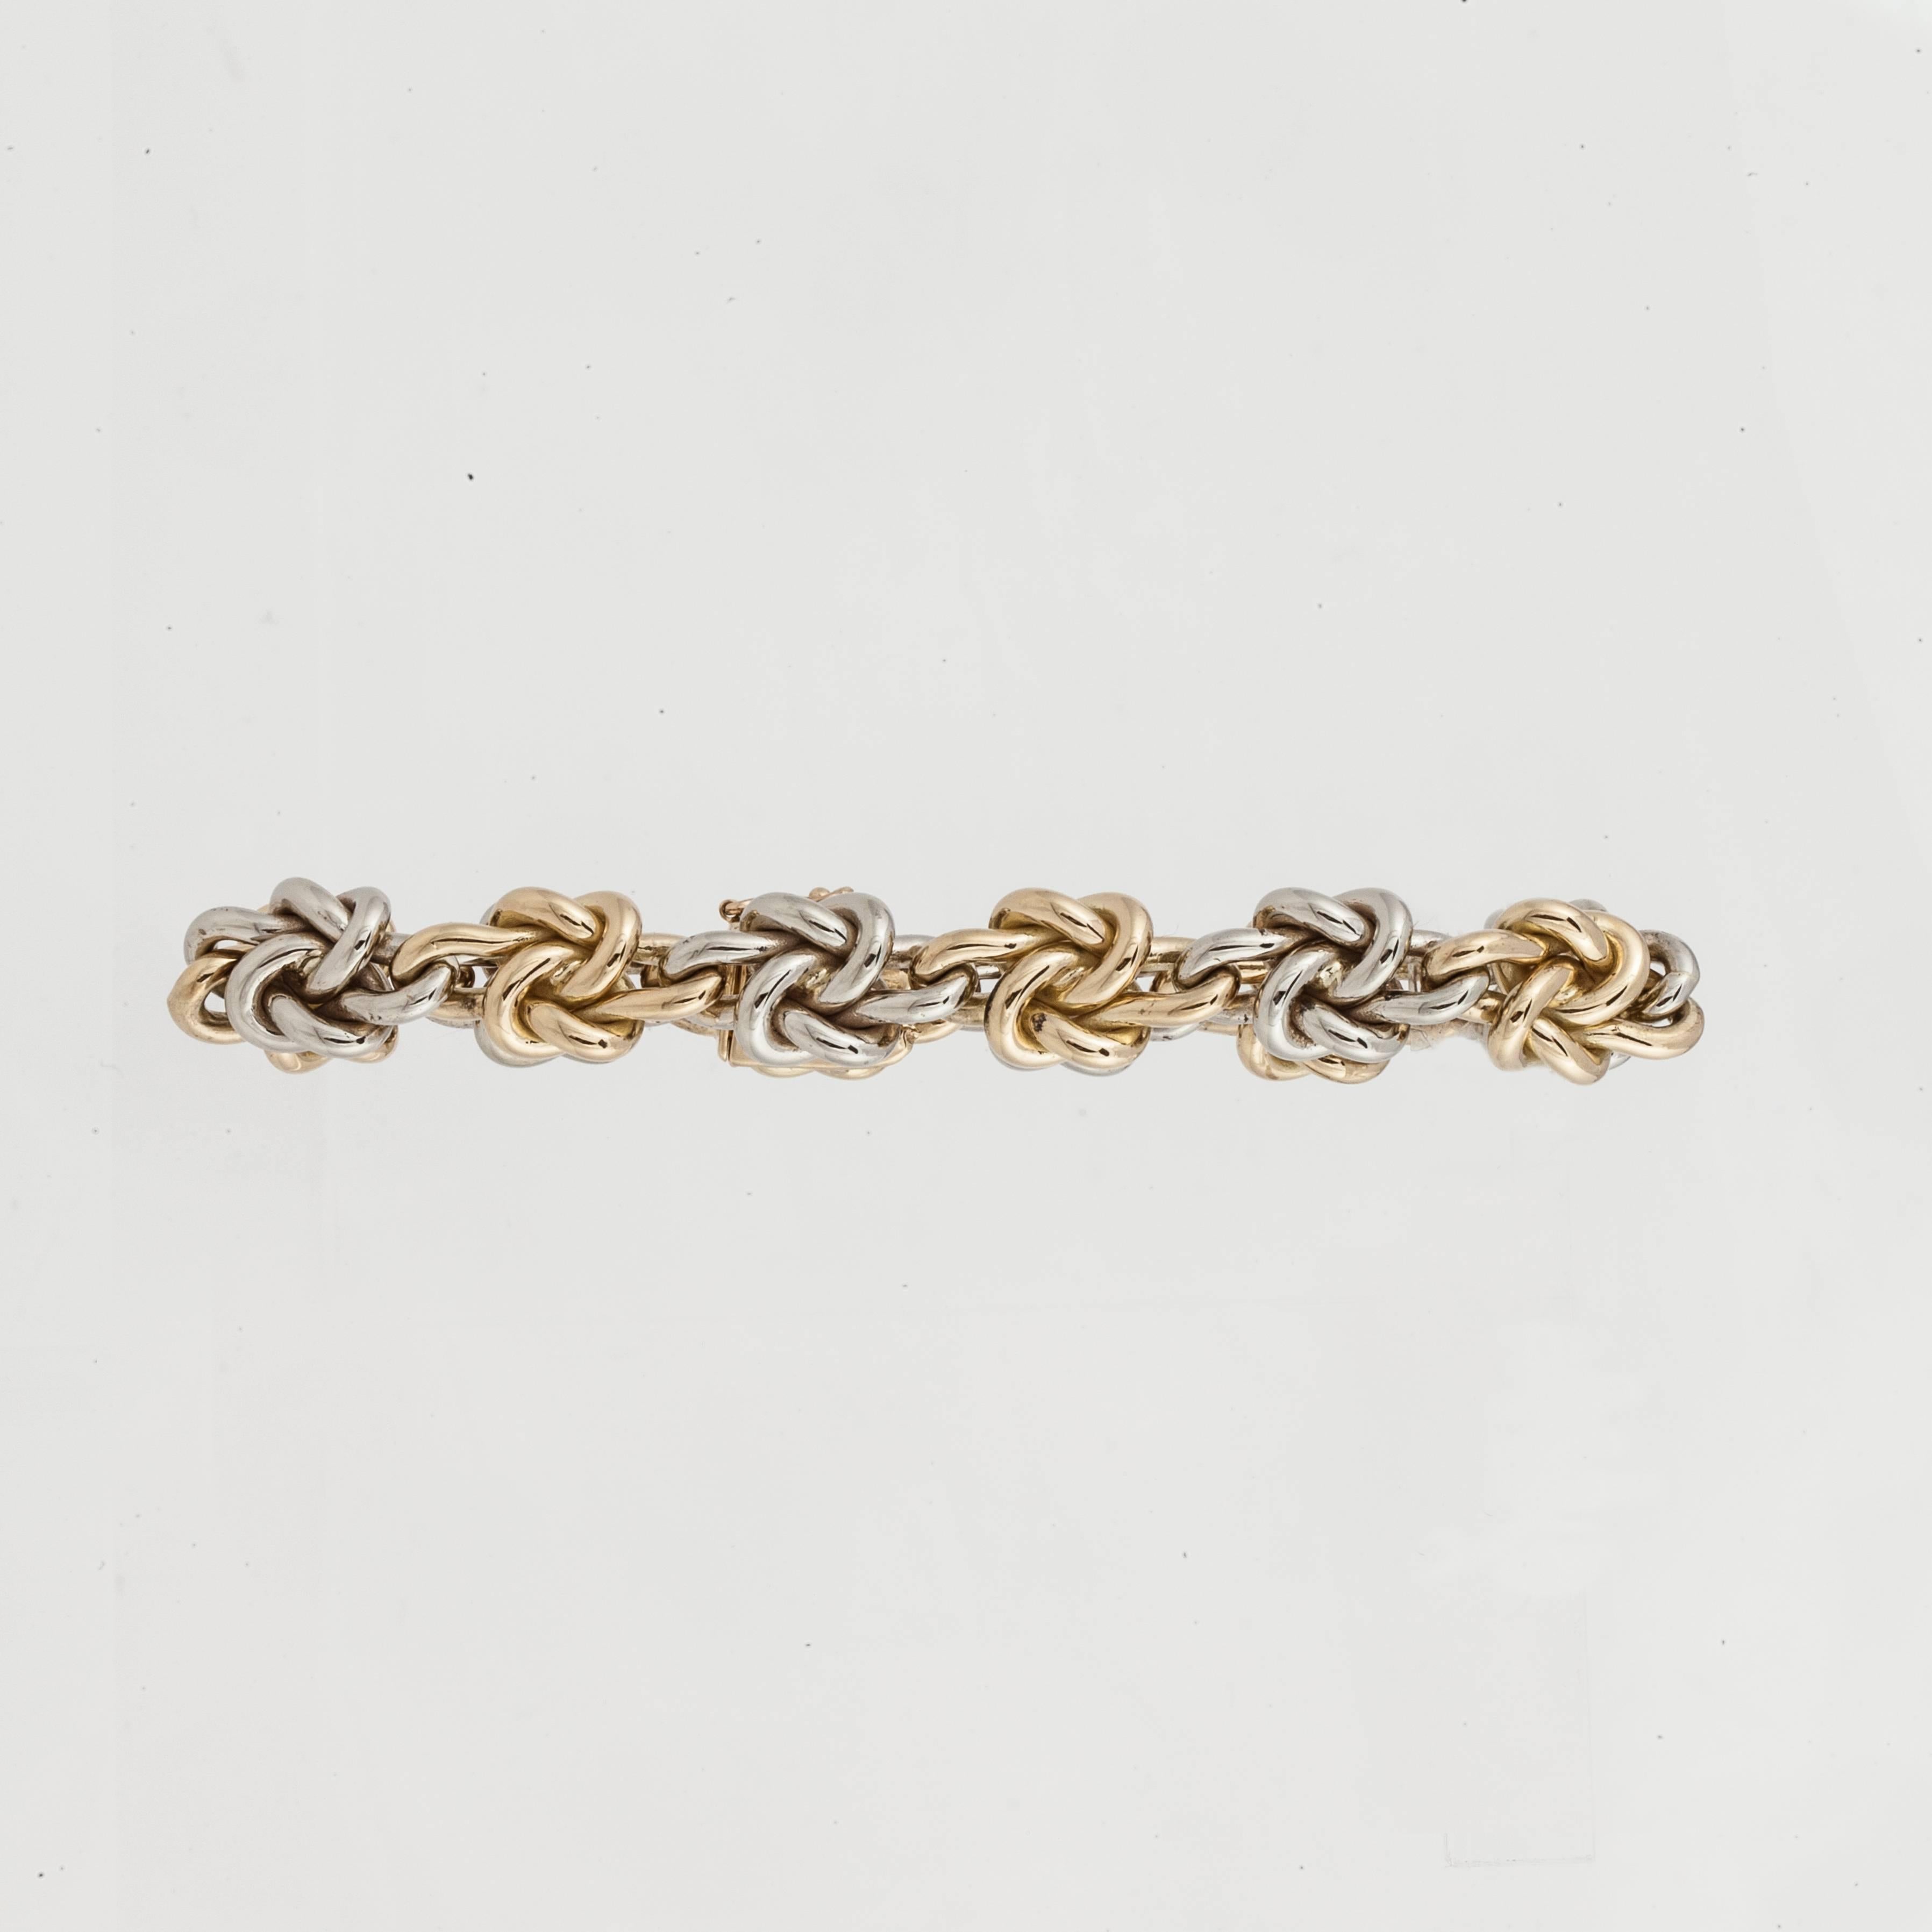 Tiffany & Co. bracelet with knots in alternating 18K white and yellow gold.  Measures 7 1/2 inches long and 7/16